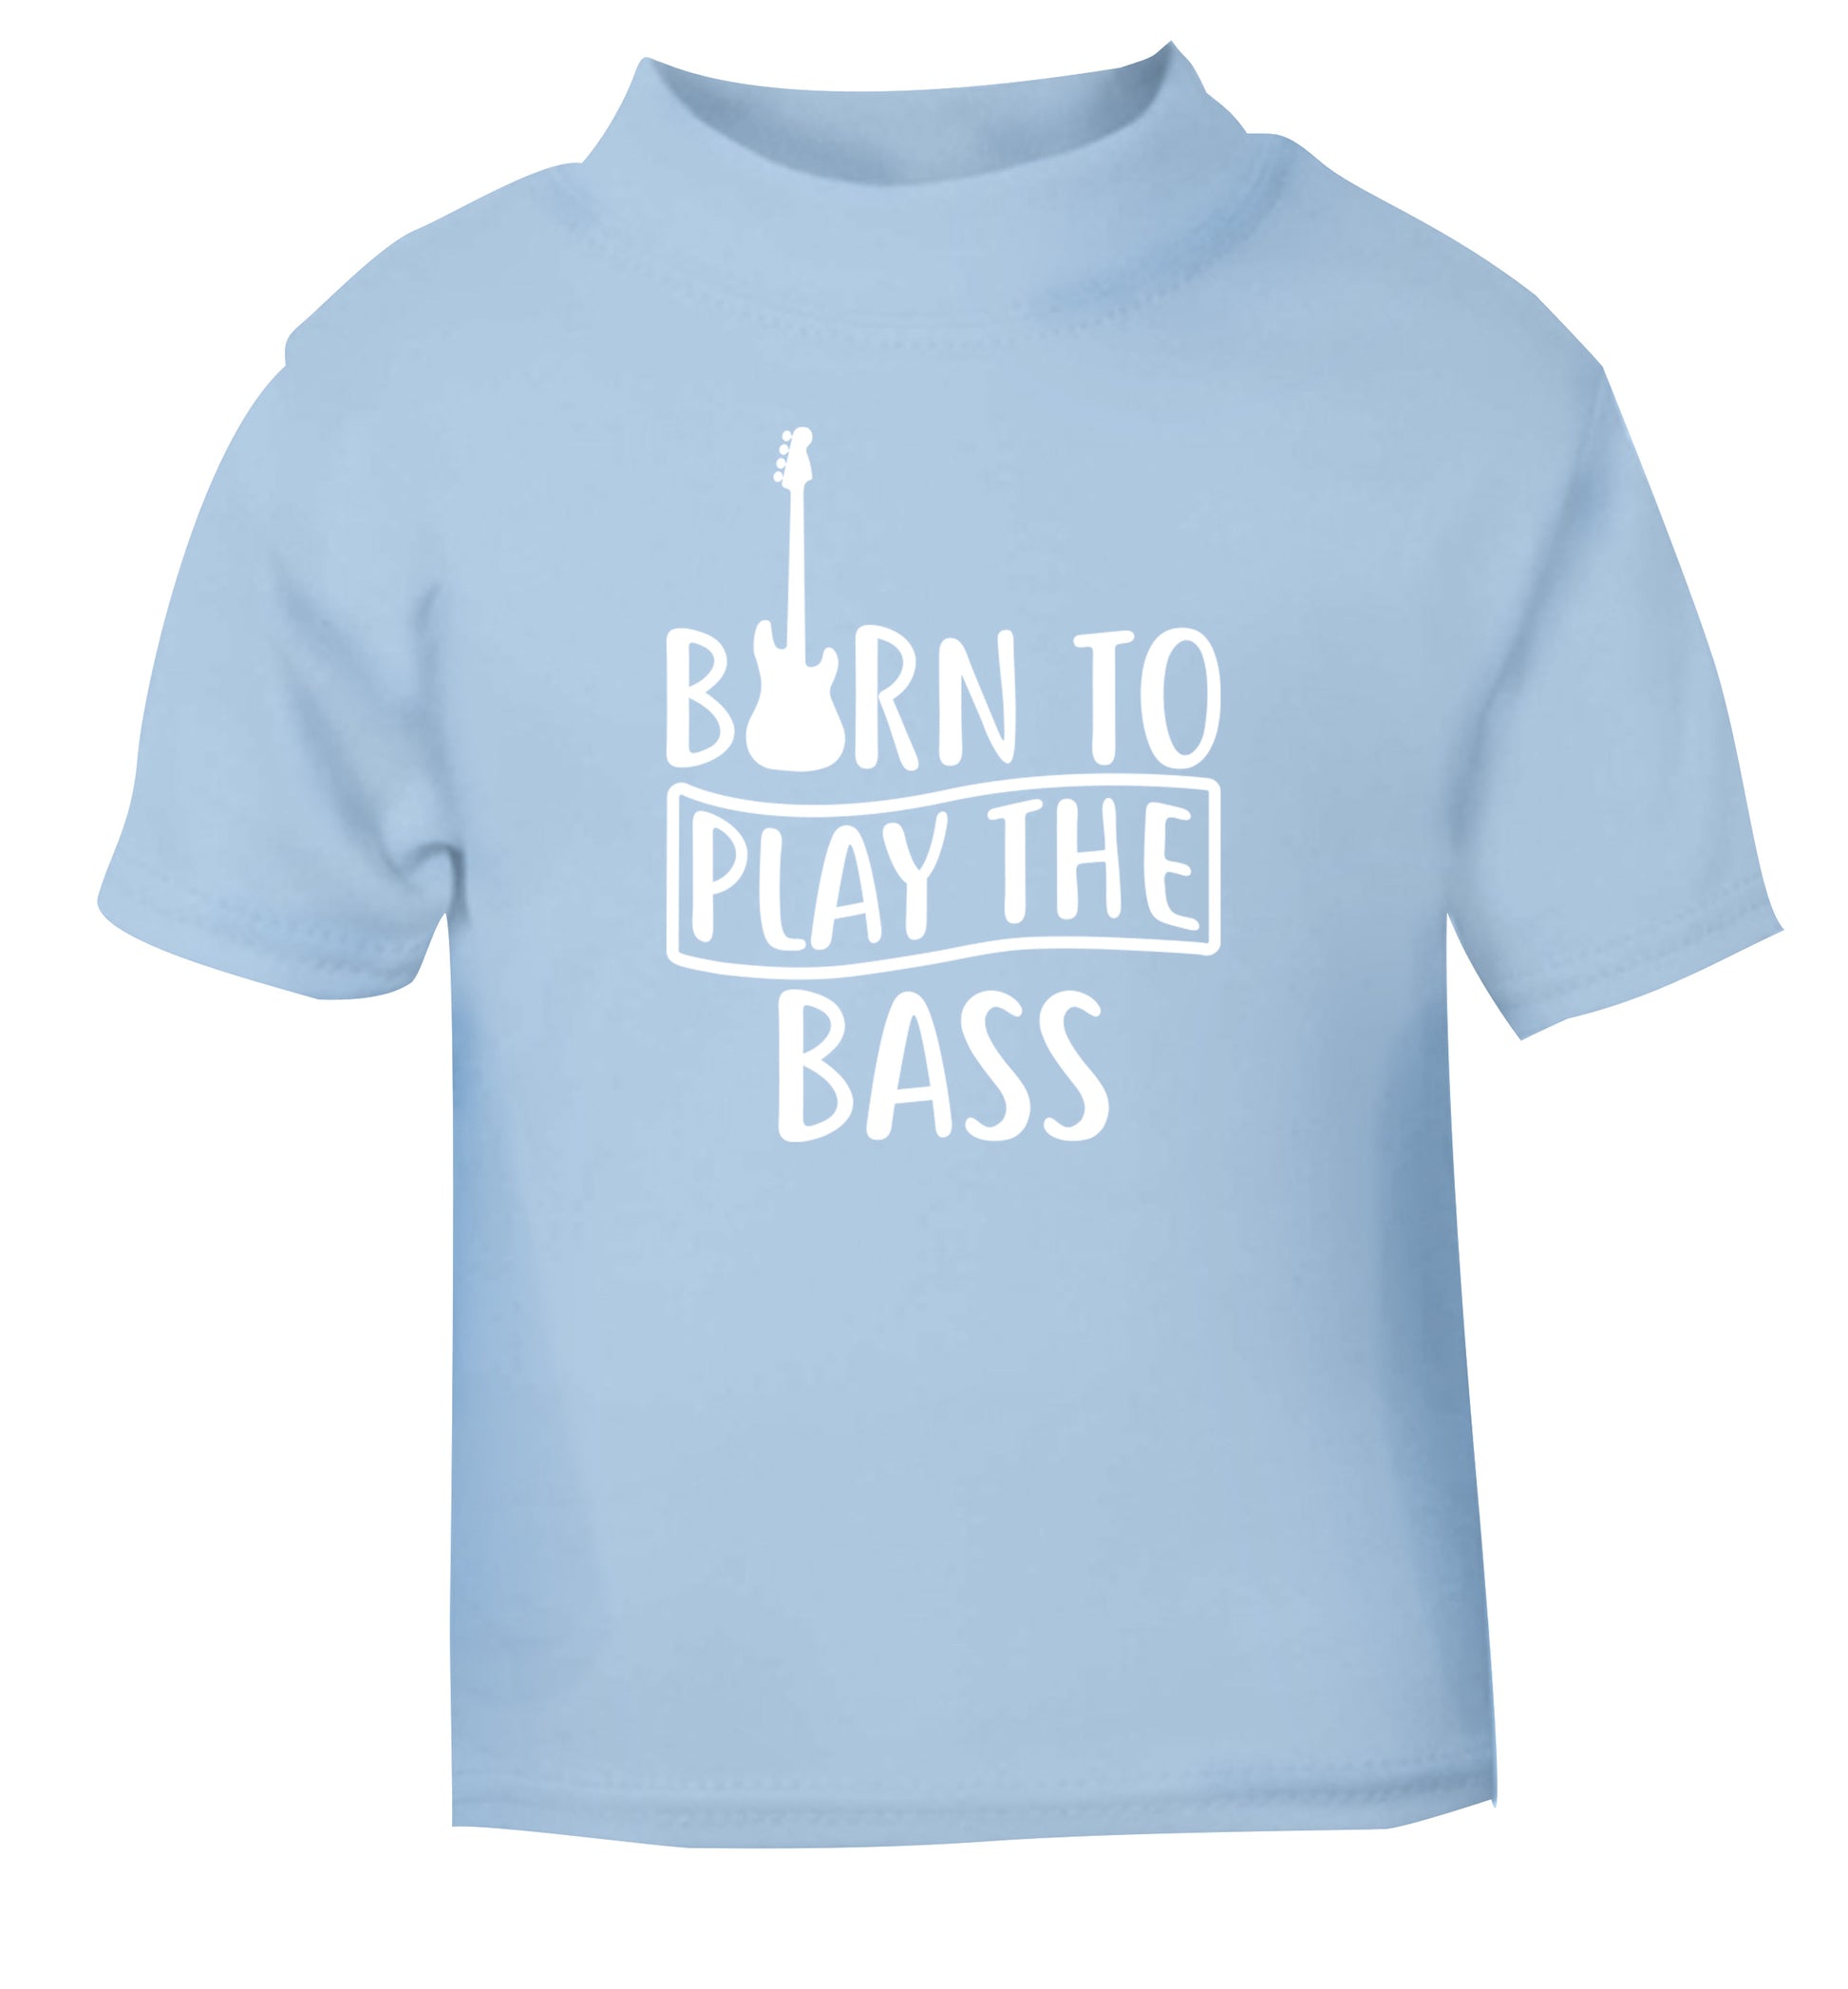 Born to play the bass light blue Baby Toddler Tshirt 2 Years